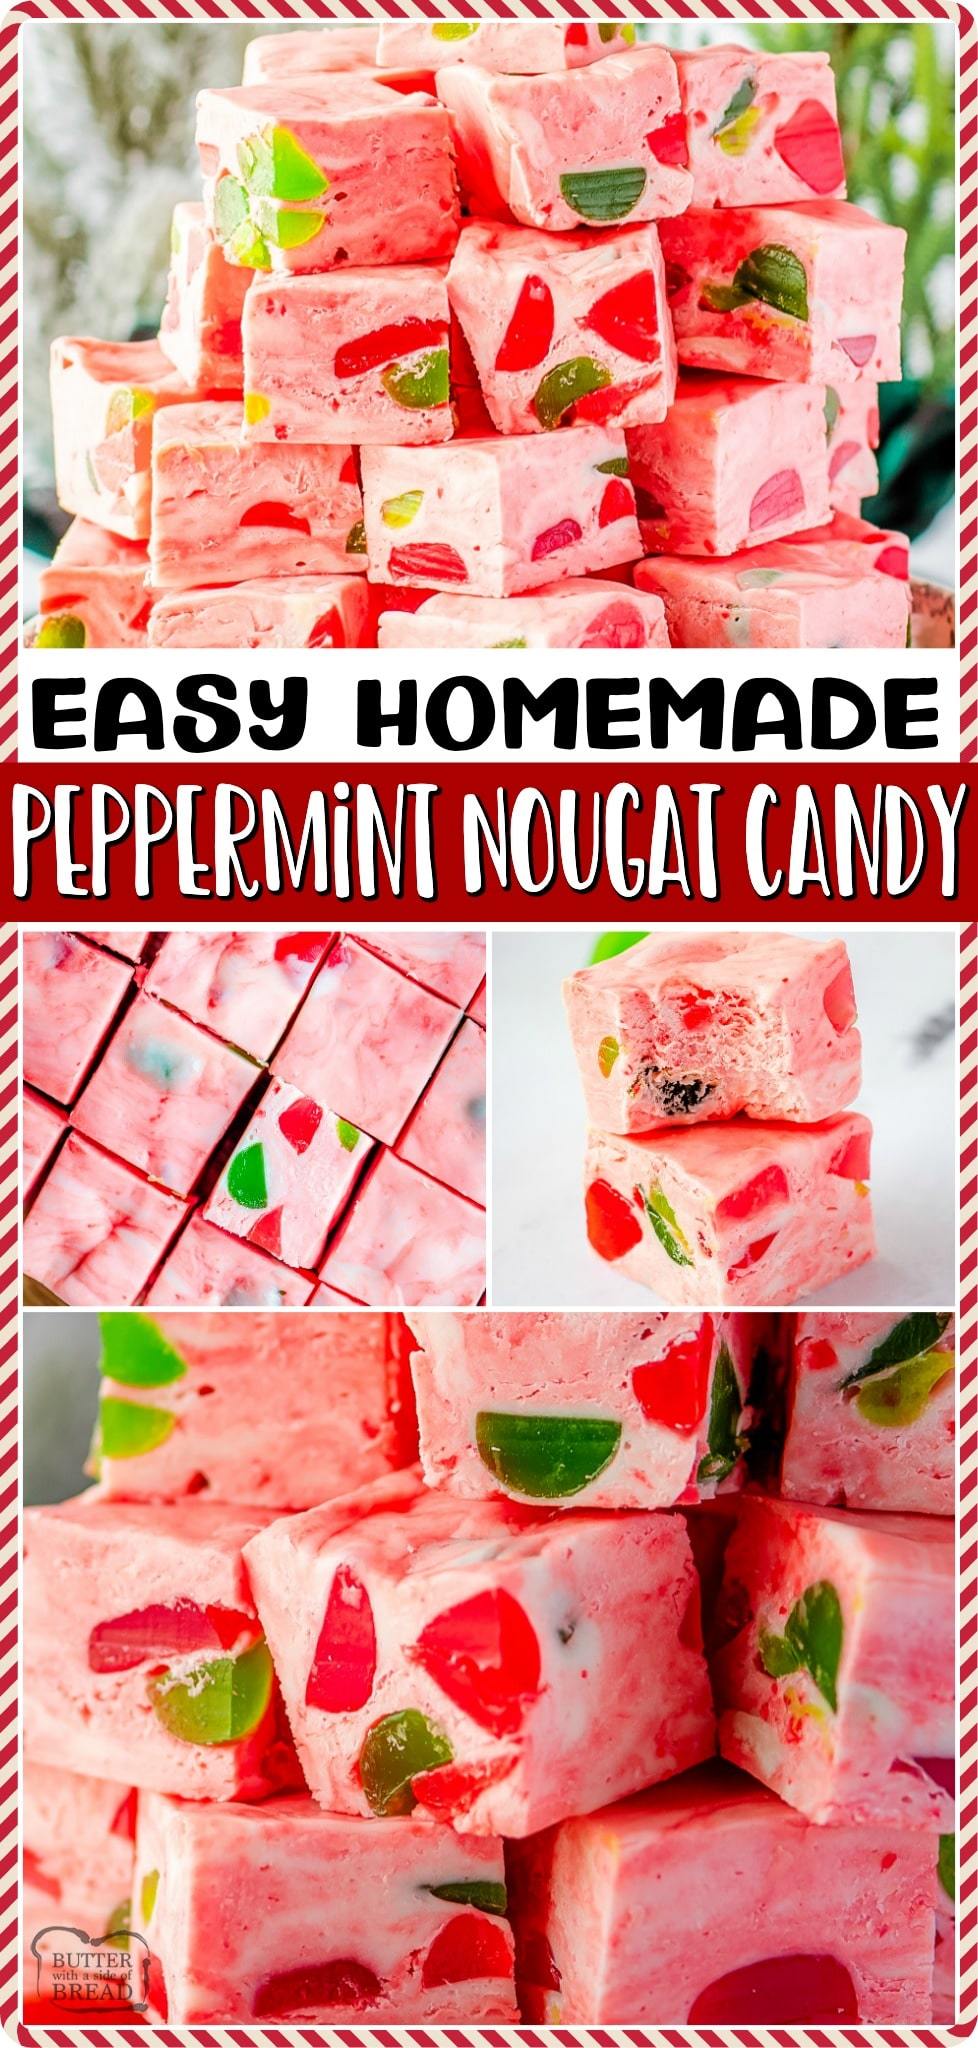 Homemade Peppermint Nougat Candy, made with 6 ingredients & is a perfectly festive holiday treat! This soft chewy candy with peppermint pieces & gumdrops is great for Christmas dessert trays!  #candy #nougat #peppermint #homemade #Christmas #gumdrops #holidays #easyrecipe from BUTTER WITH A SIDE OF BREAD